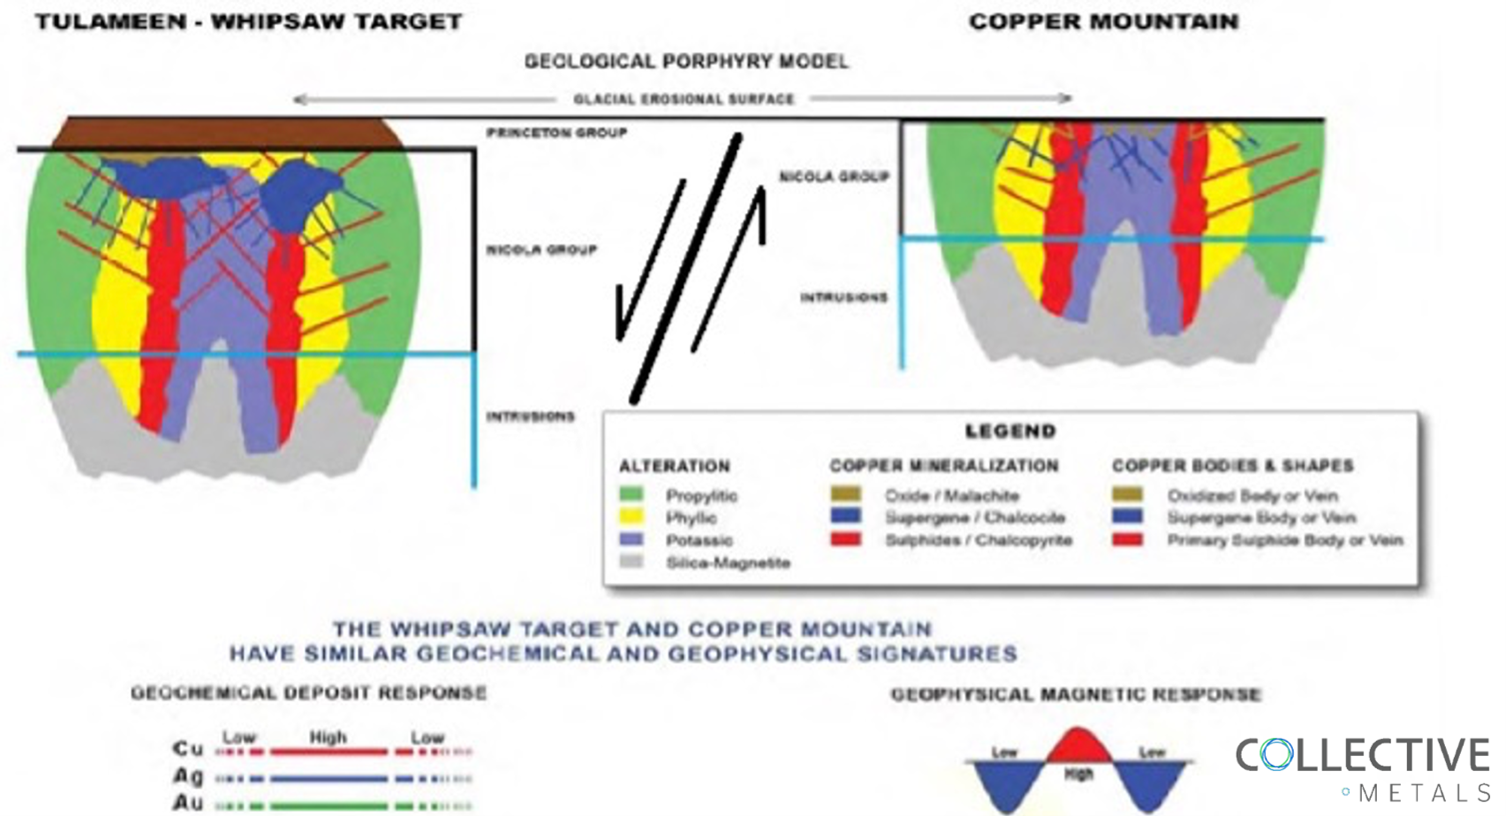 Schematic representation comparing interpreted levels of exposure of the Copper Mountain Intrusive Complex (east of the Boundary Fault; right) with the Princeton Project (west of the fault; left). For diagrammatic purposes, an identical idealized representative intrusion is displayed for comparative purposes (from Goldcliff Resources, 2013).